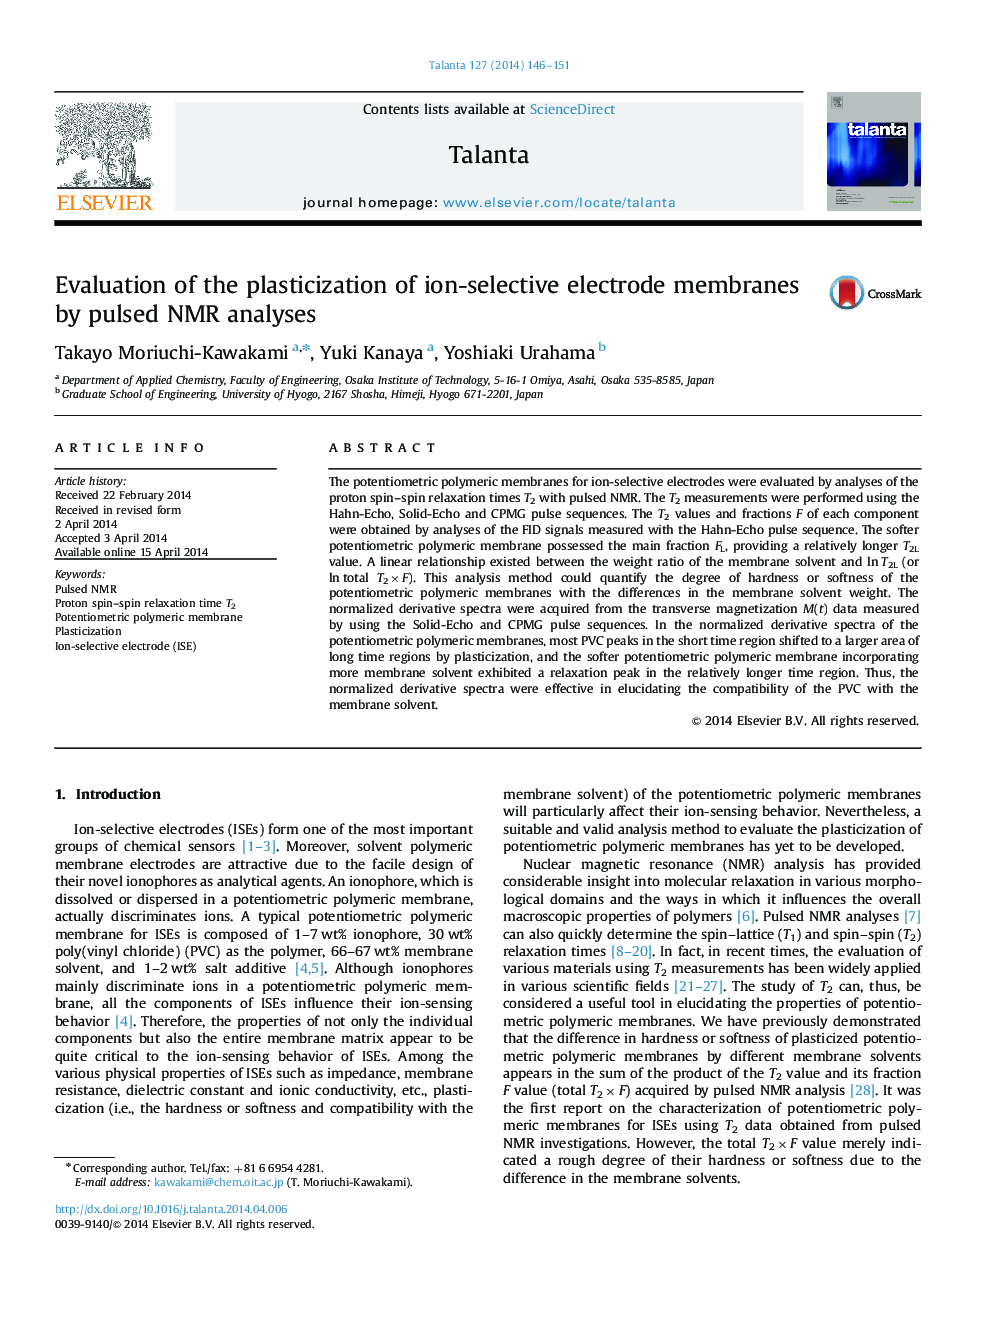 Evaluation of the plasticization of ion-selective electrode membranes by pulsed NMR analyses